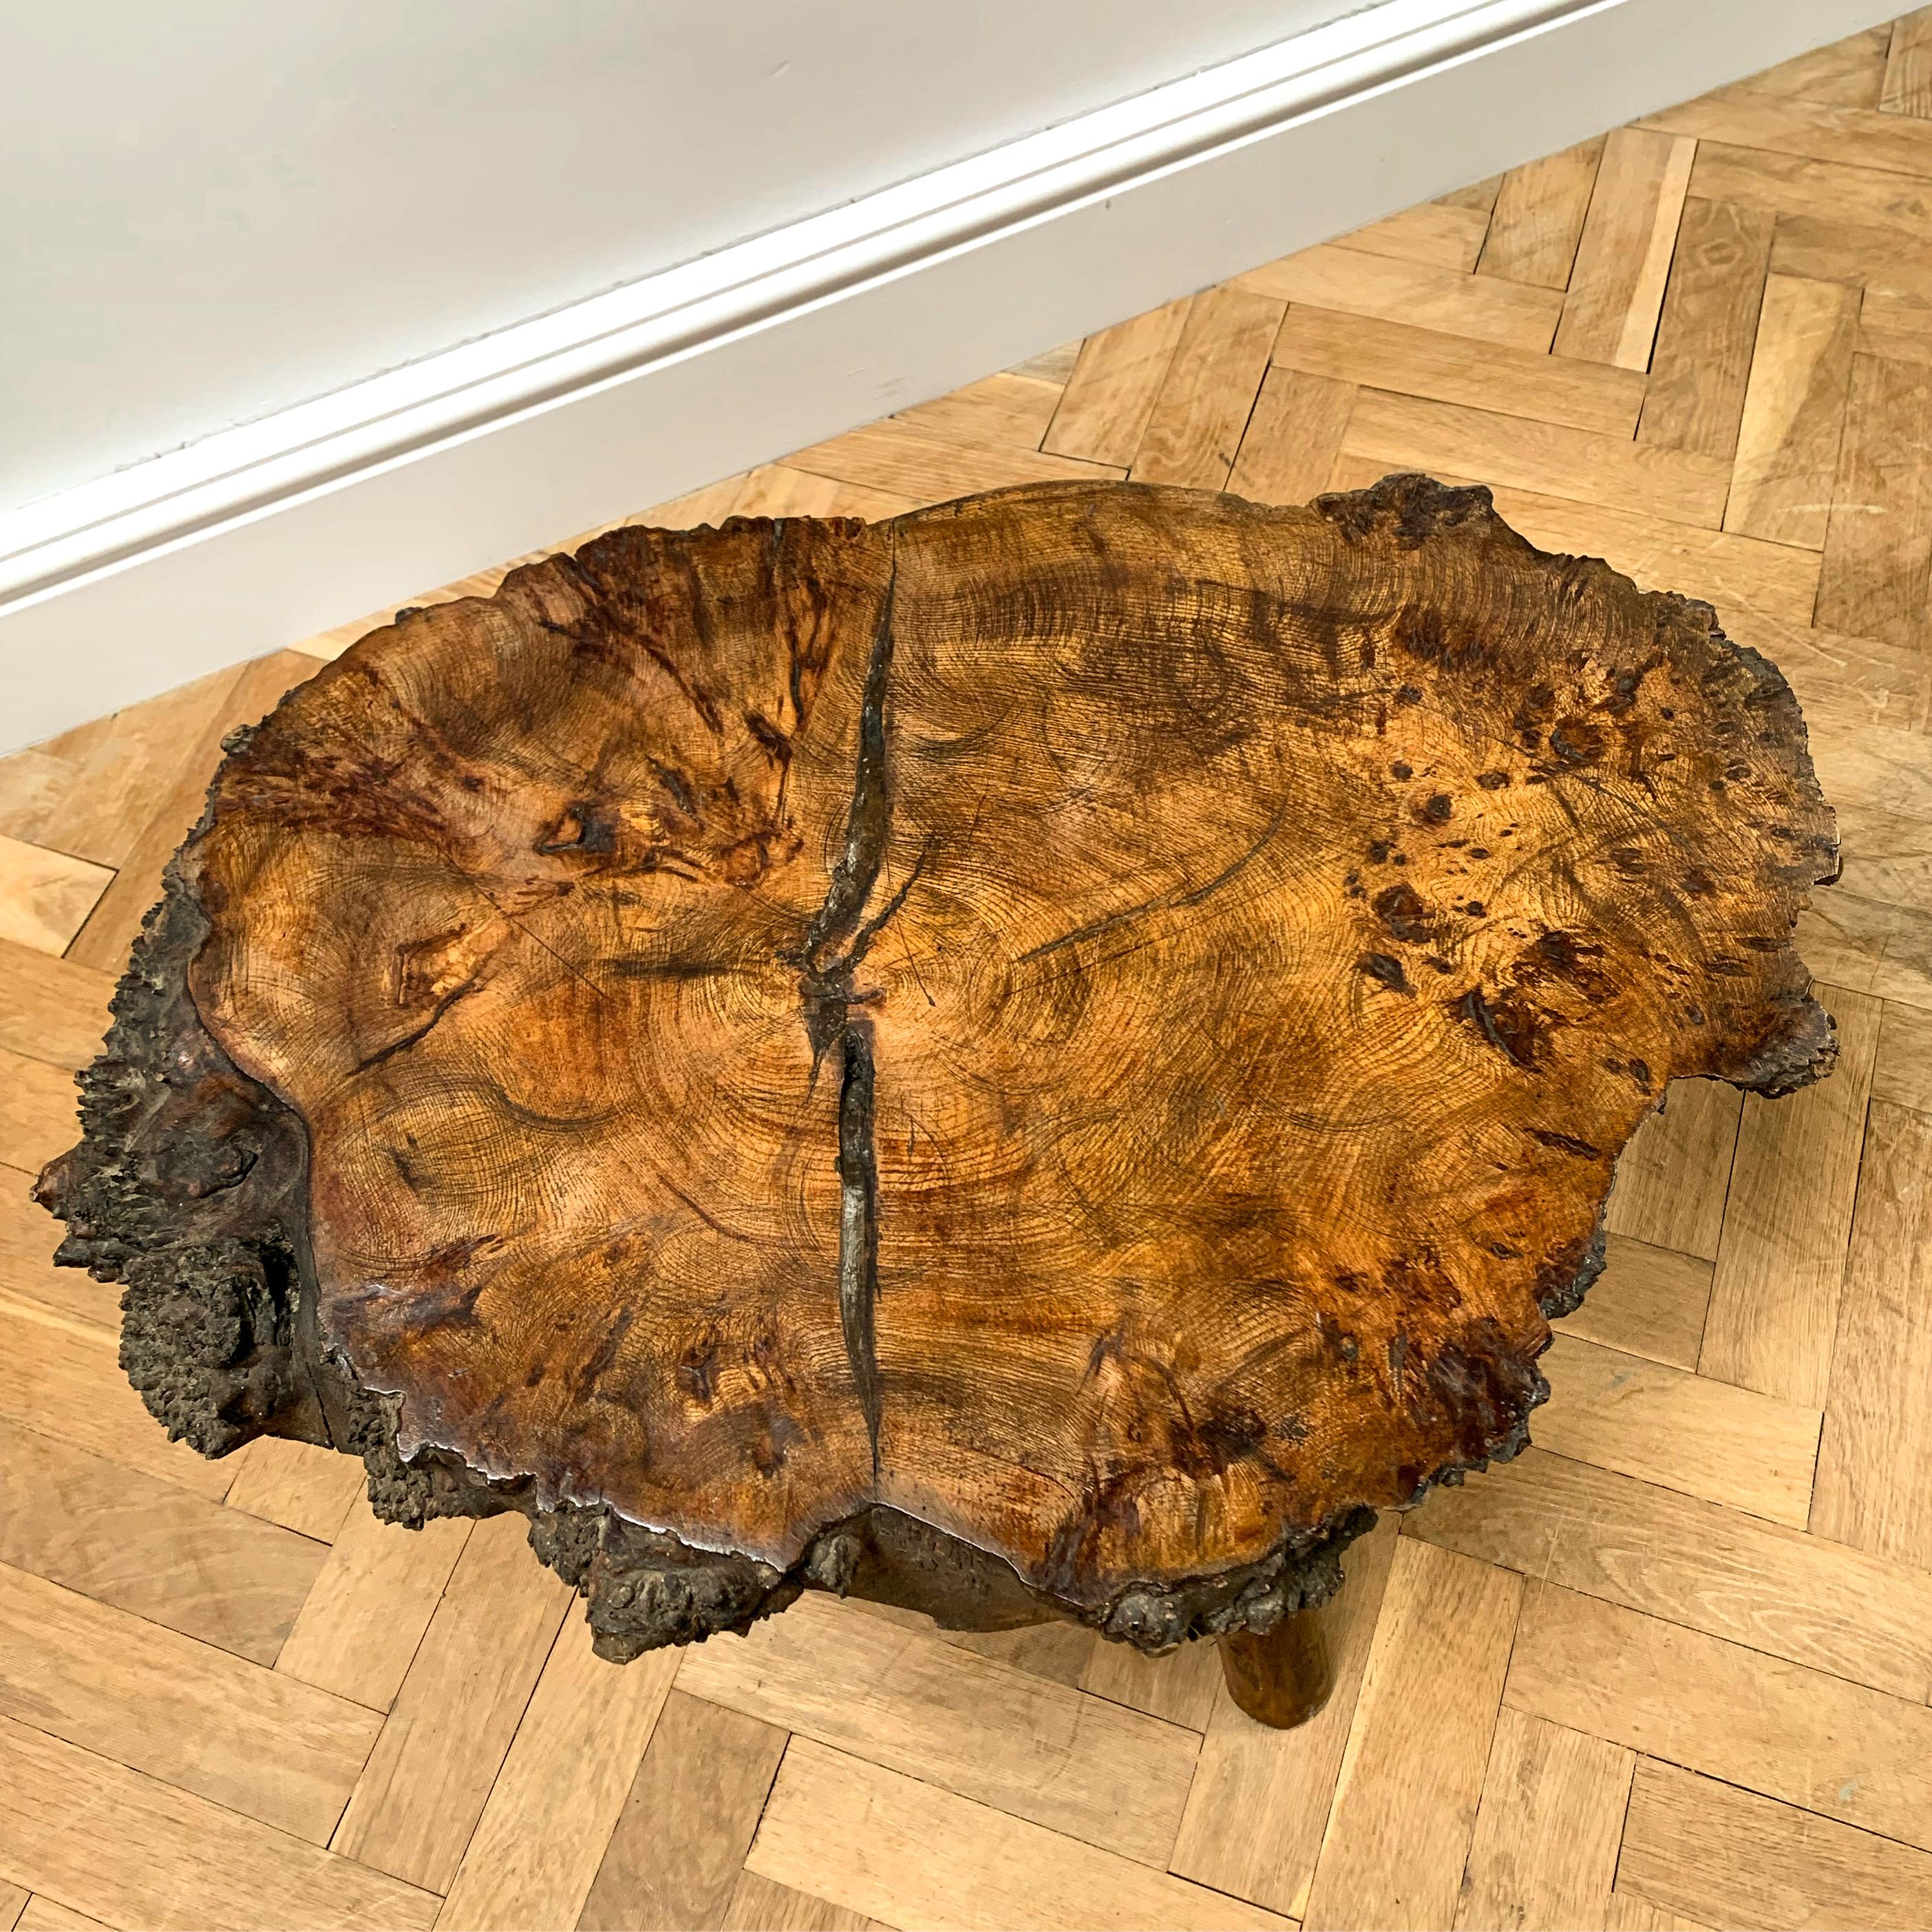 A substantial central section of French elm, roughly cut with live burr edge and polished surface, standing on three branch legs.

H 43 x W 77 x D 50 cms